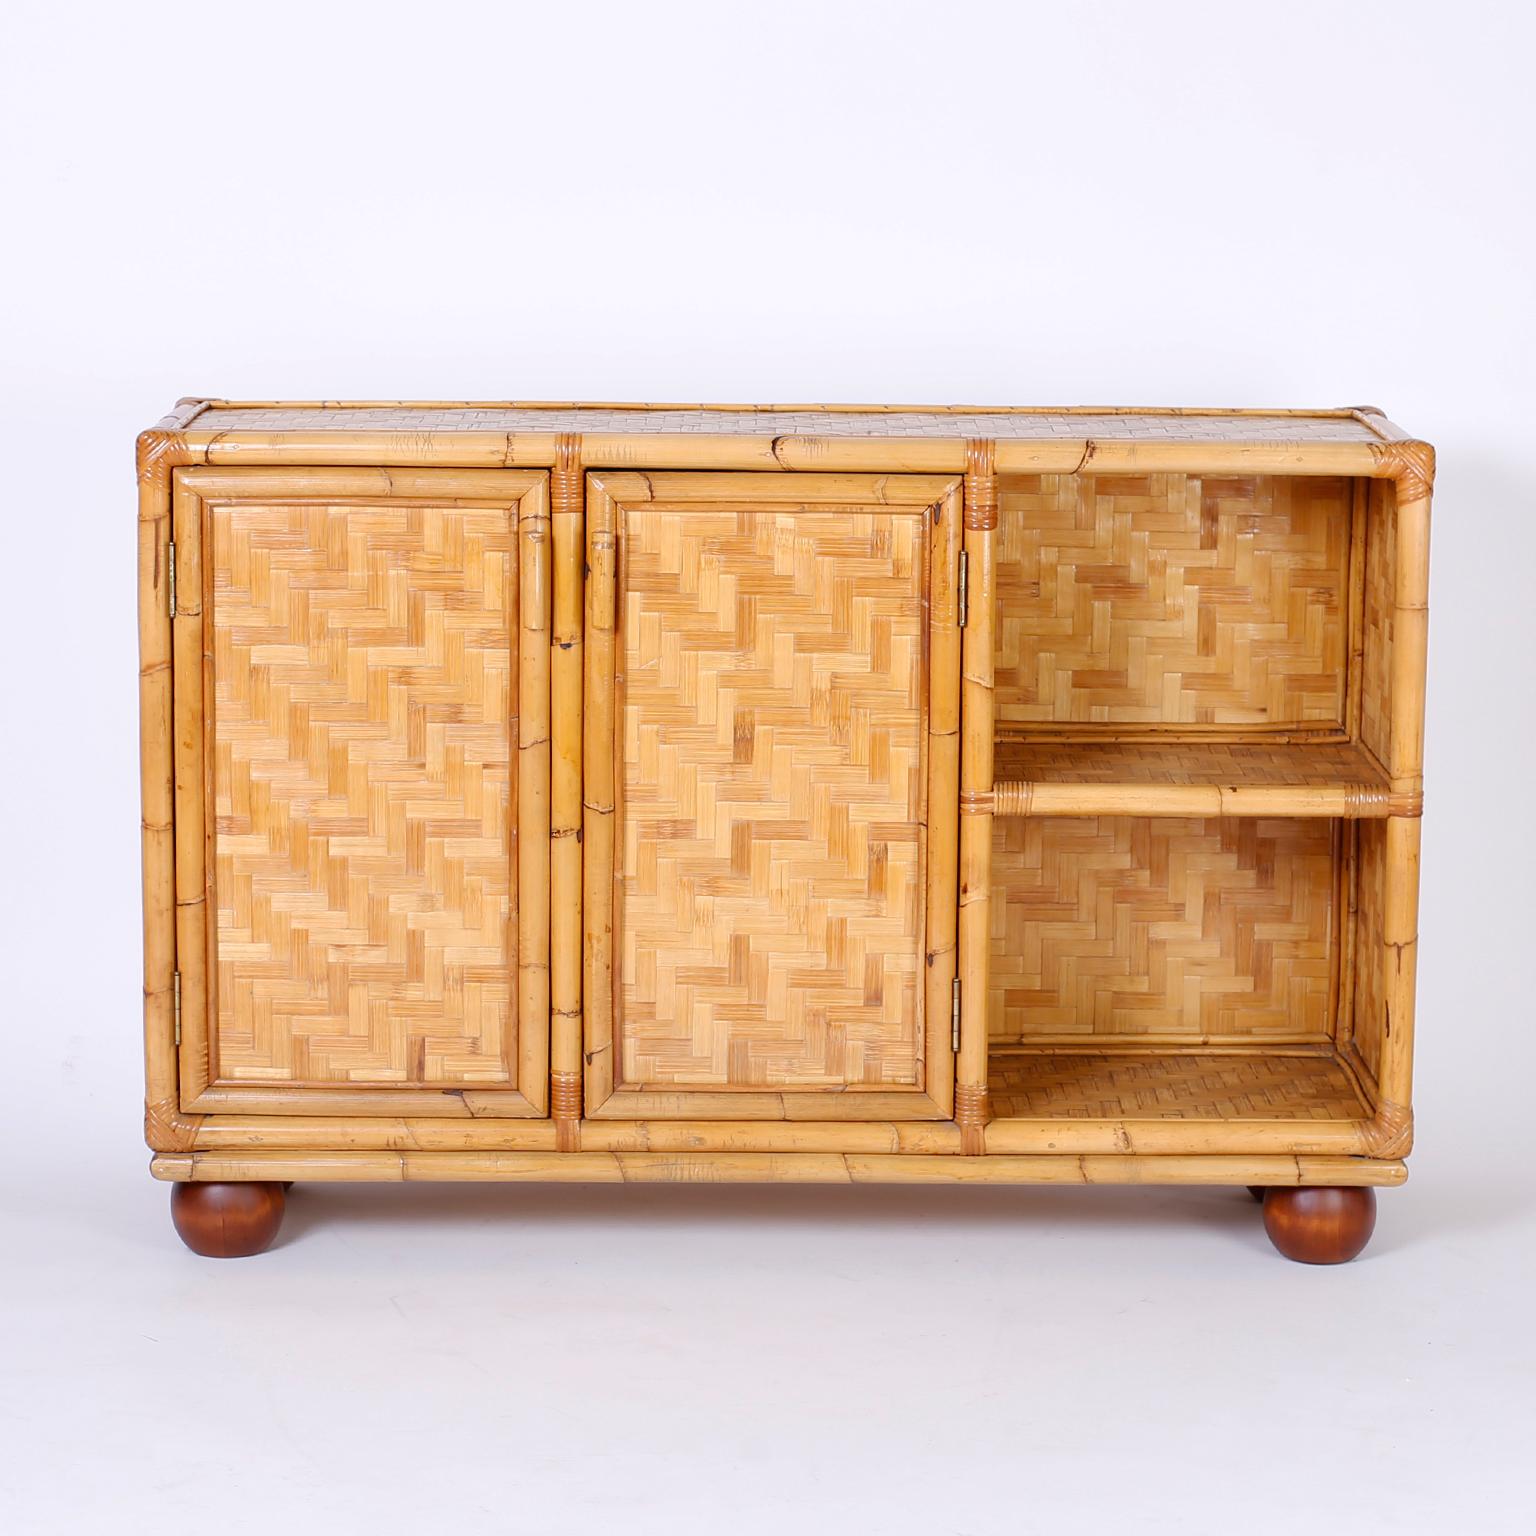 Unusual asymmetrical server featuring a bamboo frame wrapped at the corners with reed. The bar is complete with herringbone bamboo panels throughout, bun feet, and plenty of storage.